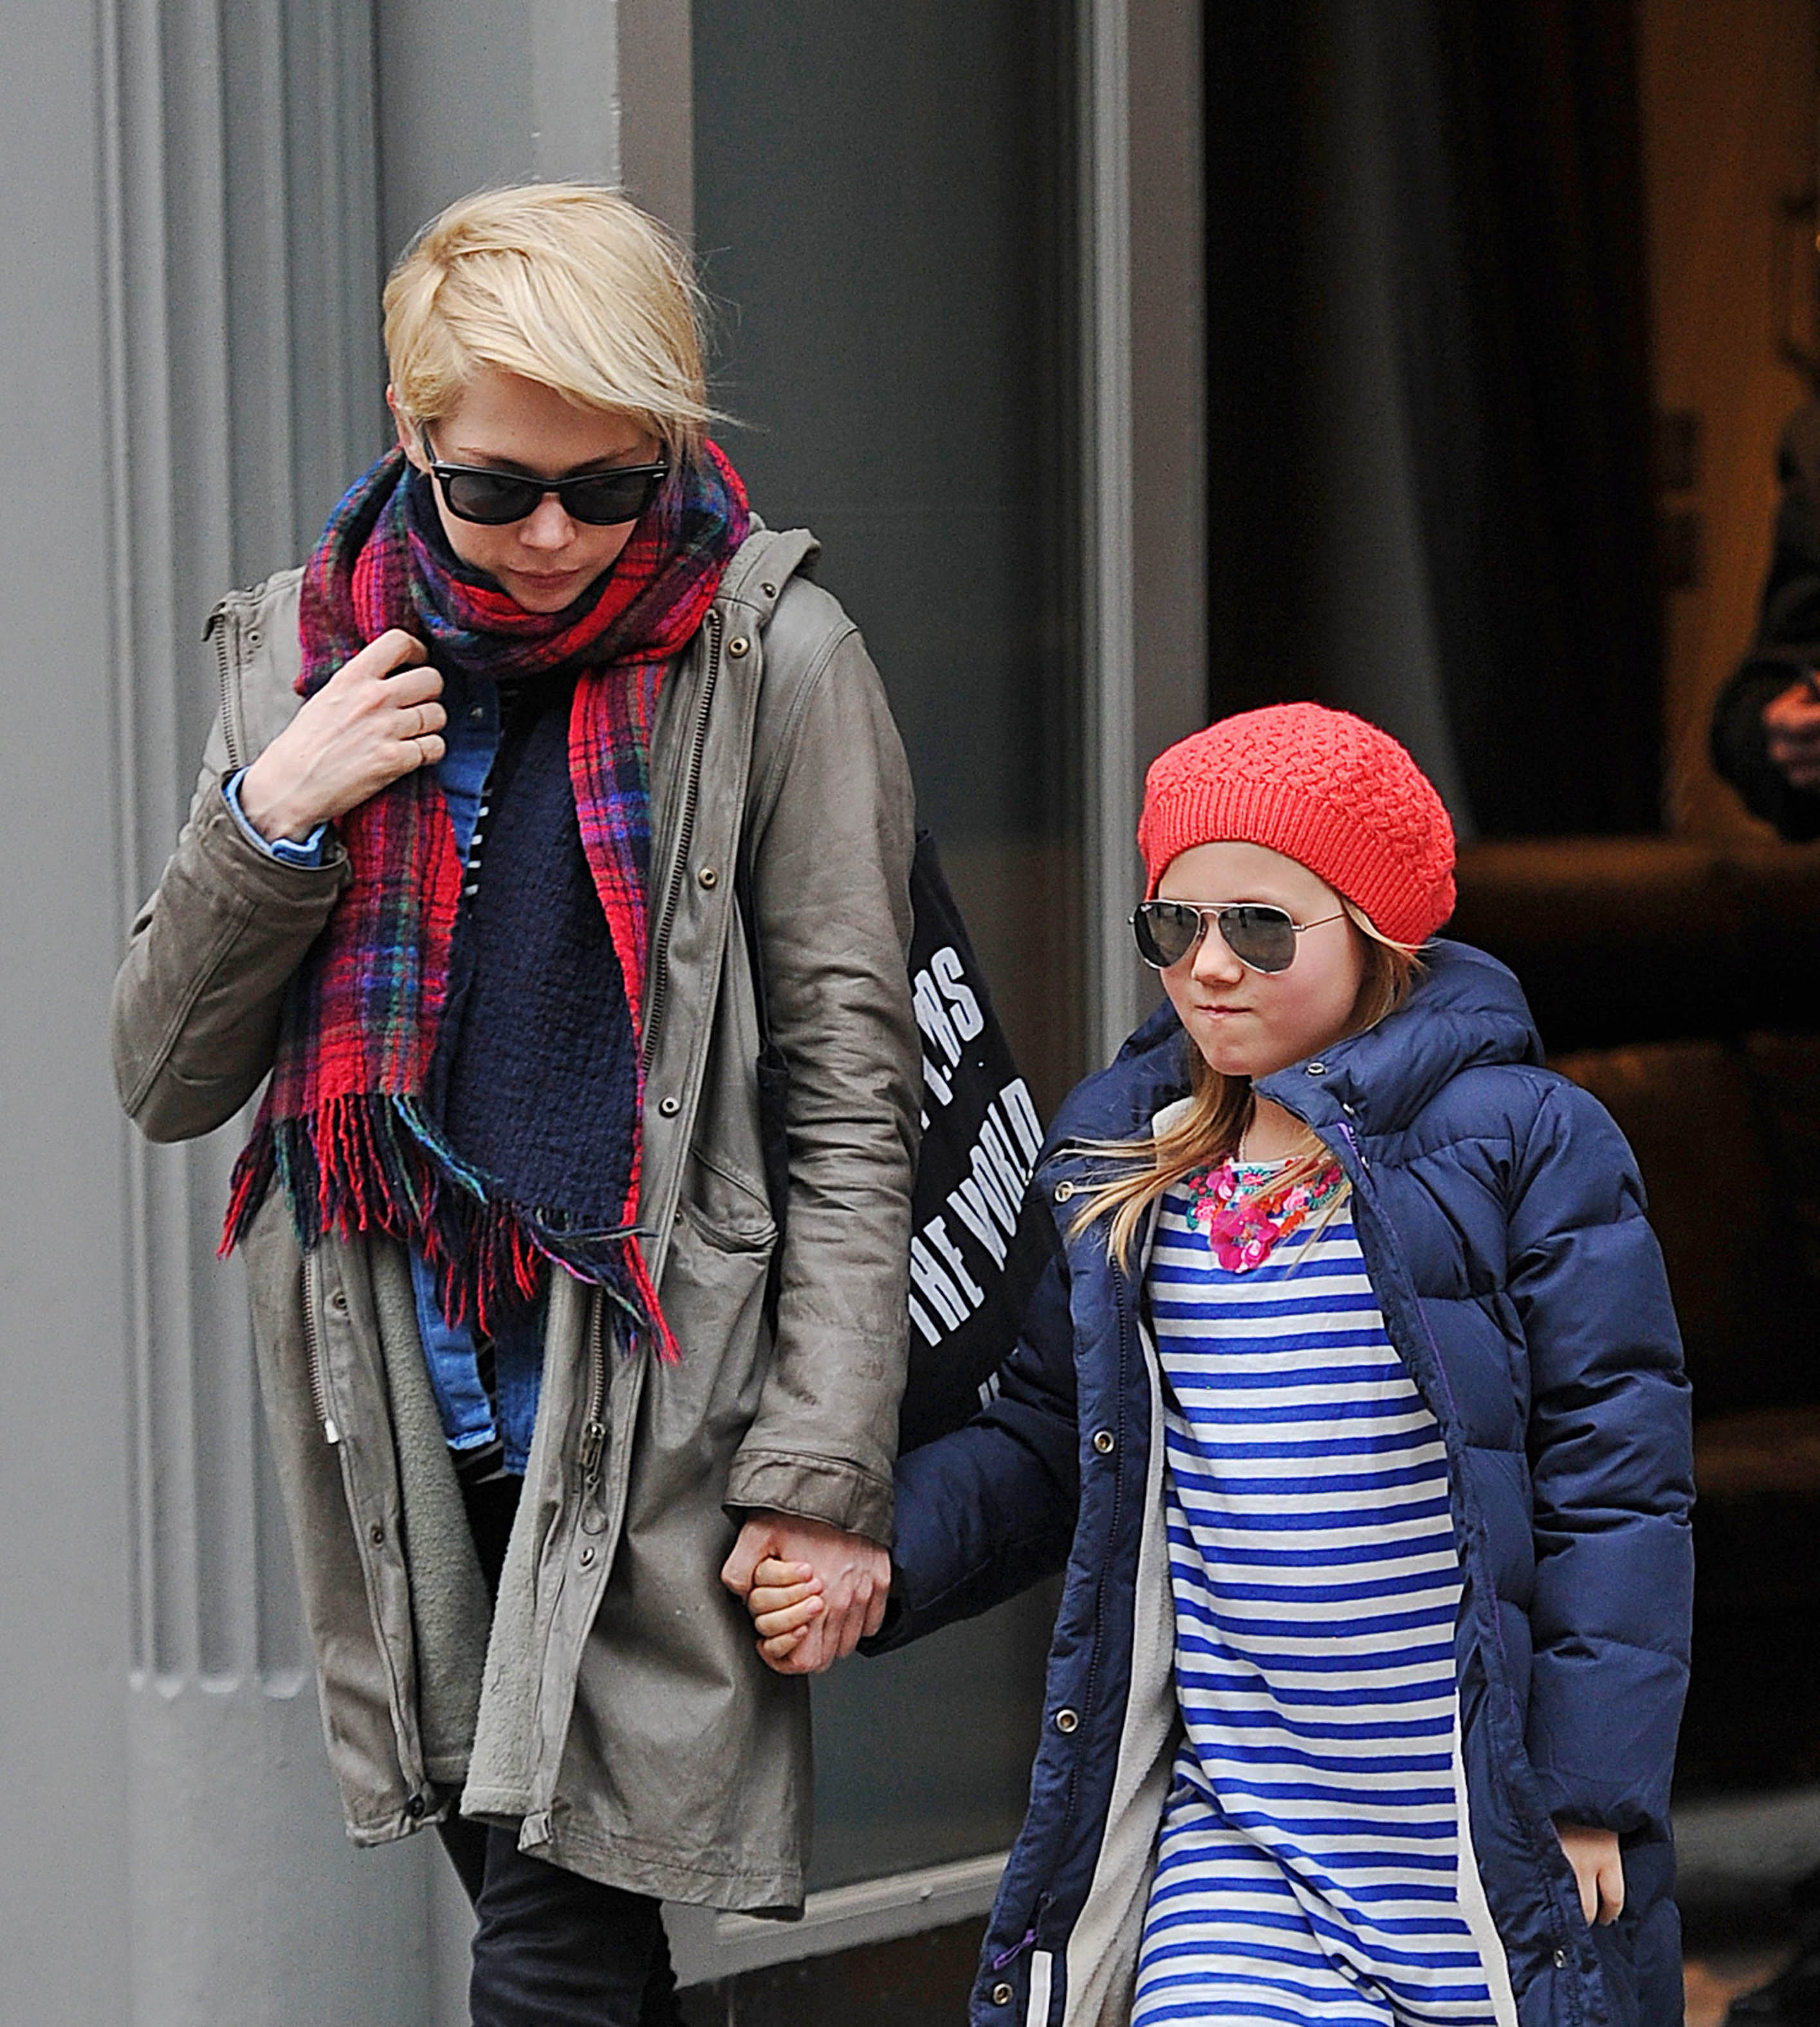 Michelle Williams and her daughter, Matilda Ledger, in New York City in 2013. | Source: Getty Images